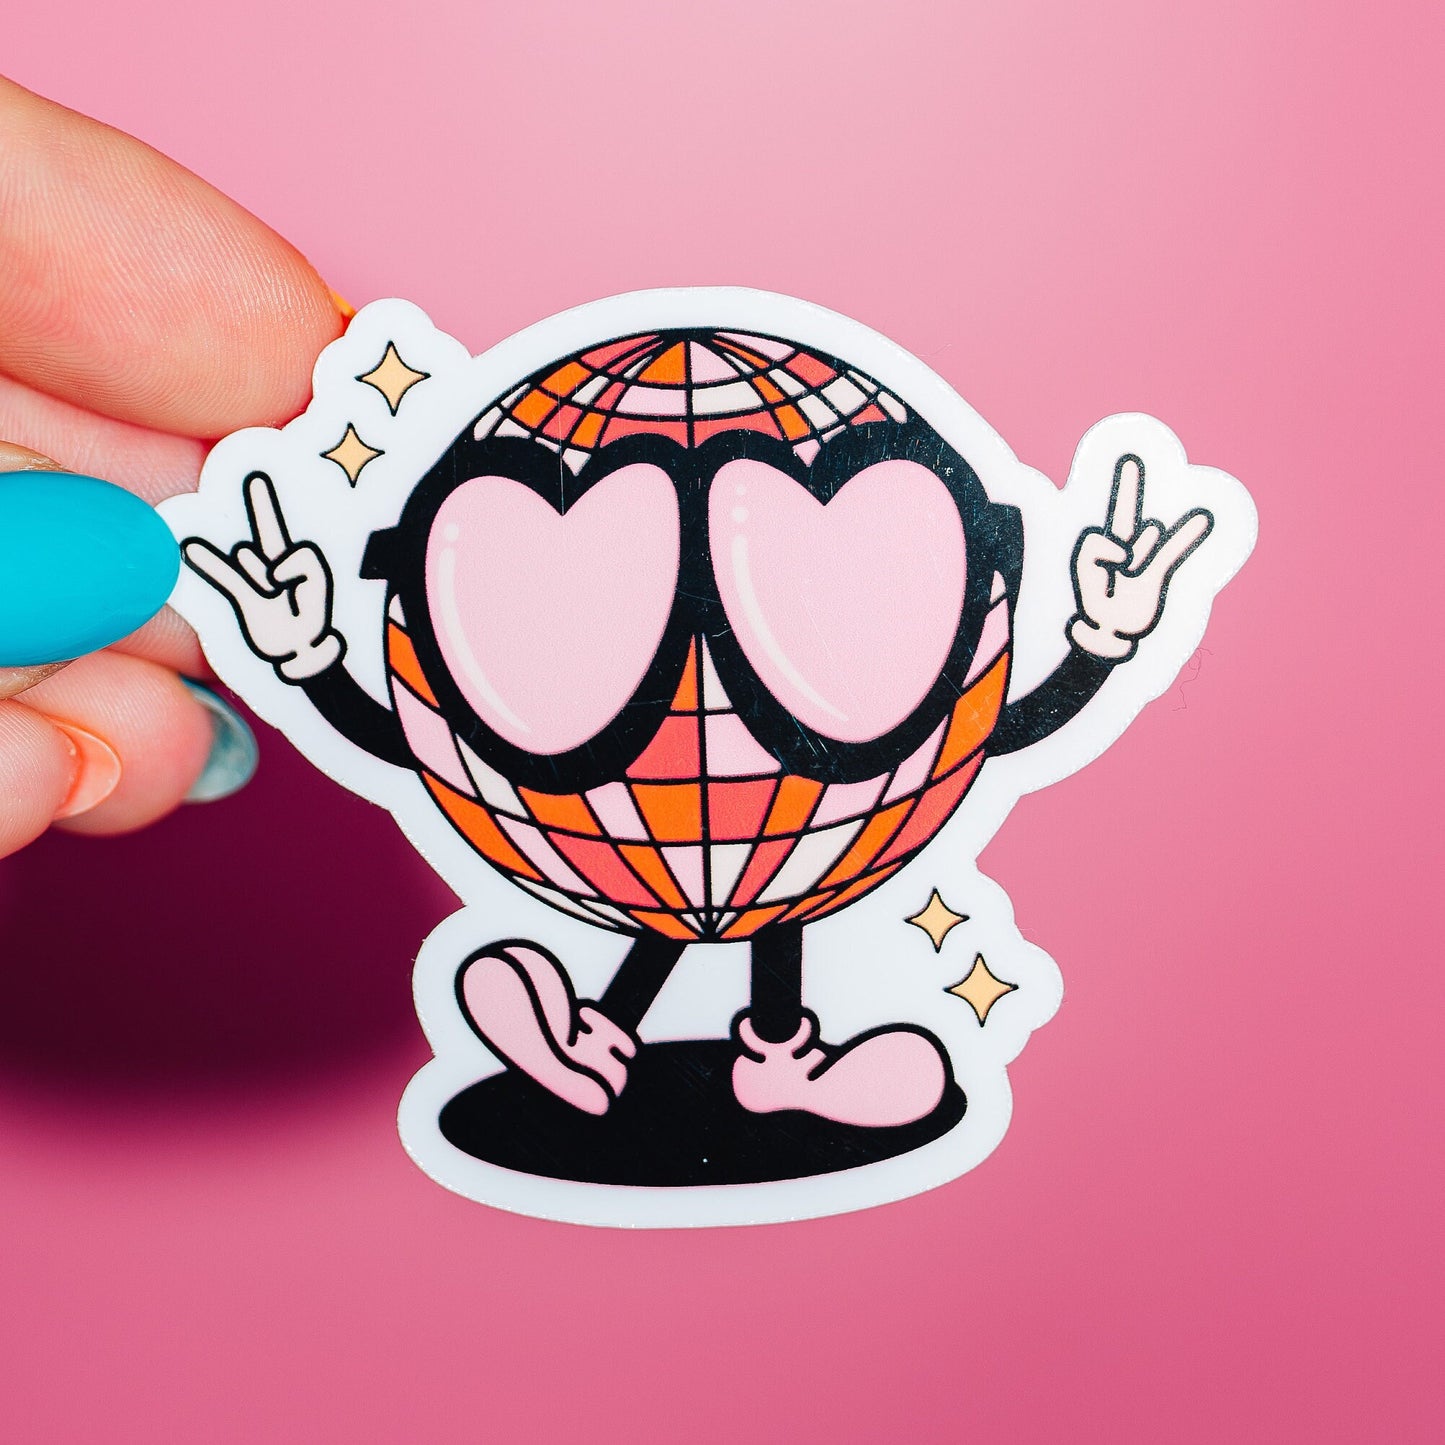 Dancing Disco Ball Sticker, Retro Pink Vibes, Heart Sunglasses, Rock Sign, Cute Trendy, Groovy Hippie, Funky Party, Bachelorette Gift